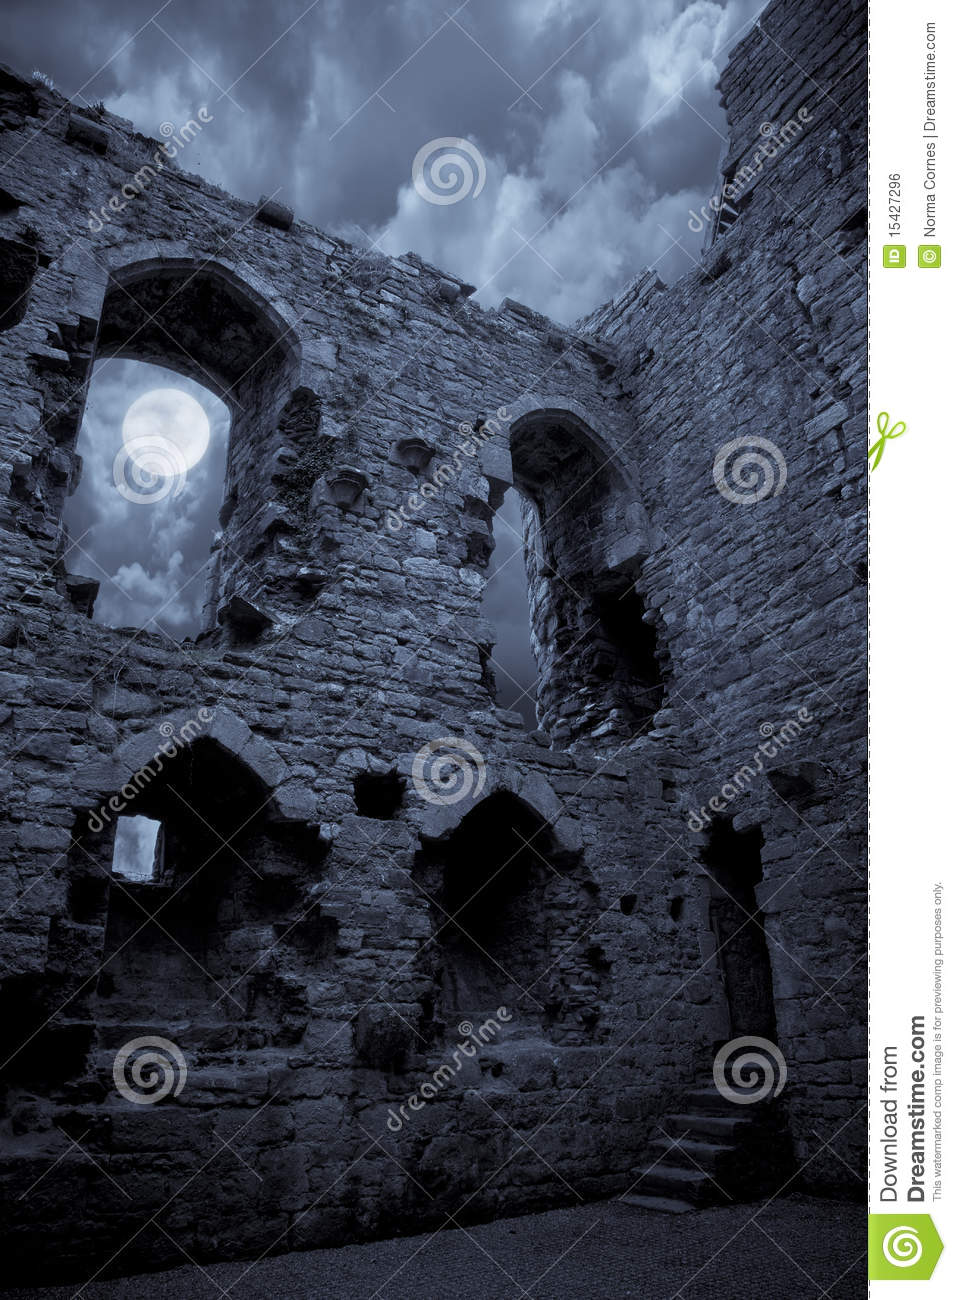 Spooky Castle Royalty Free Stock Image   Image  15427296